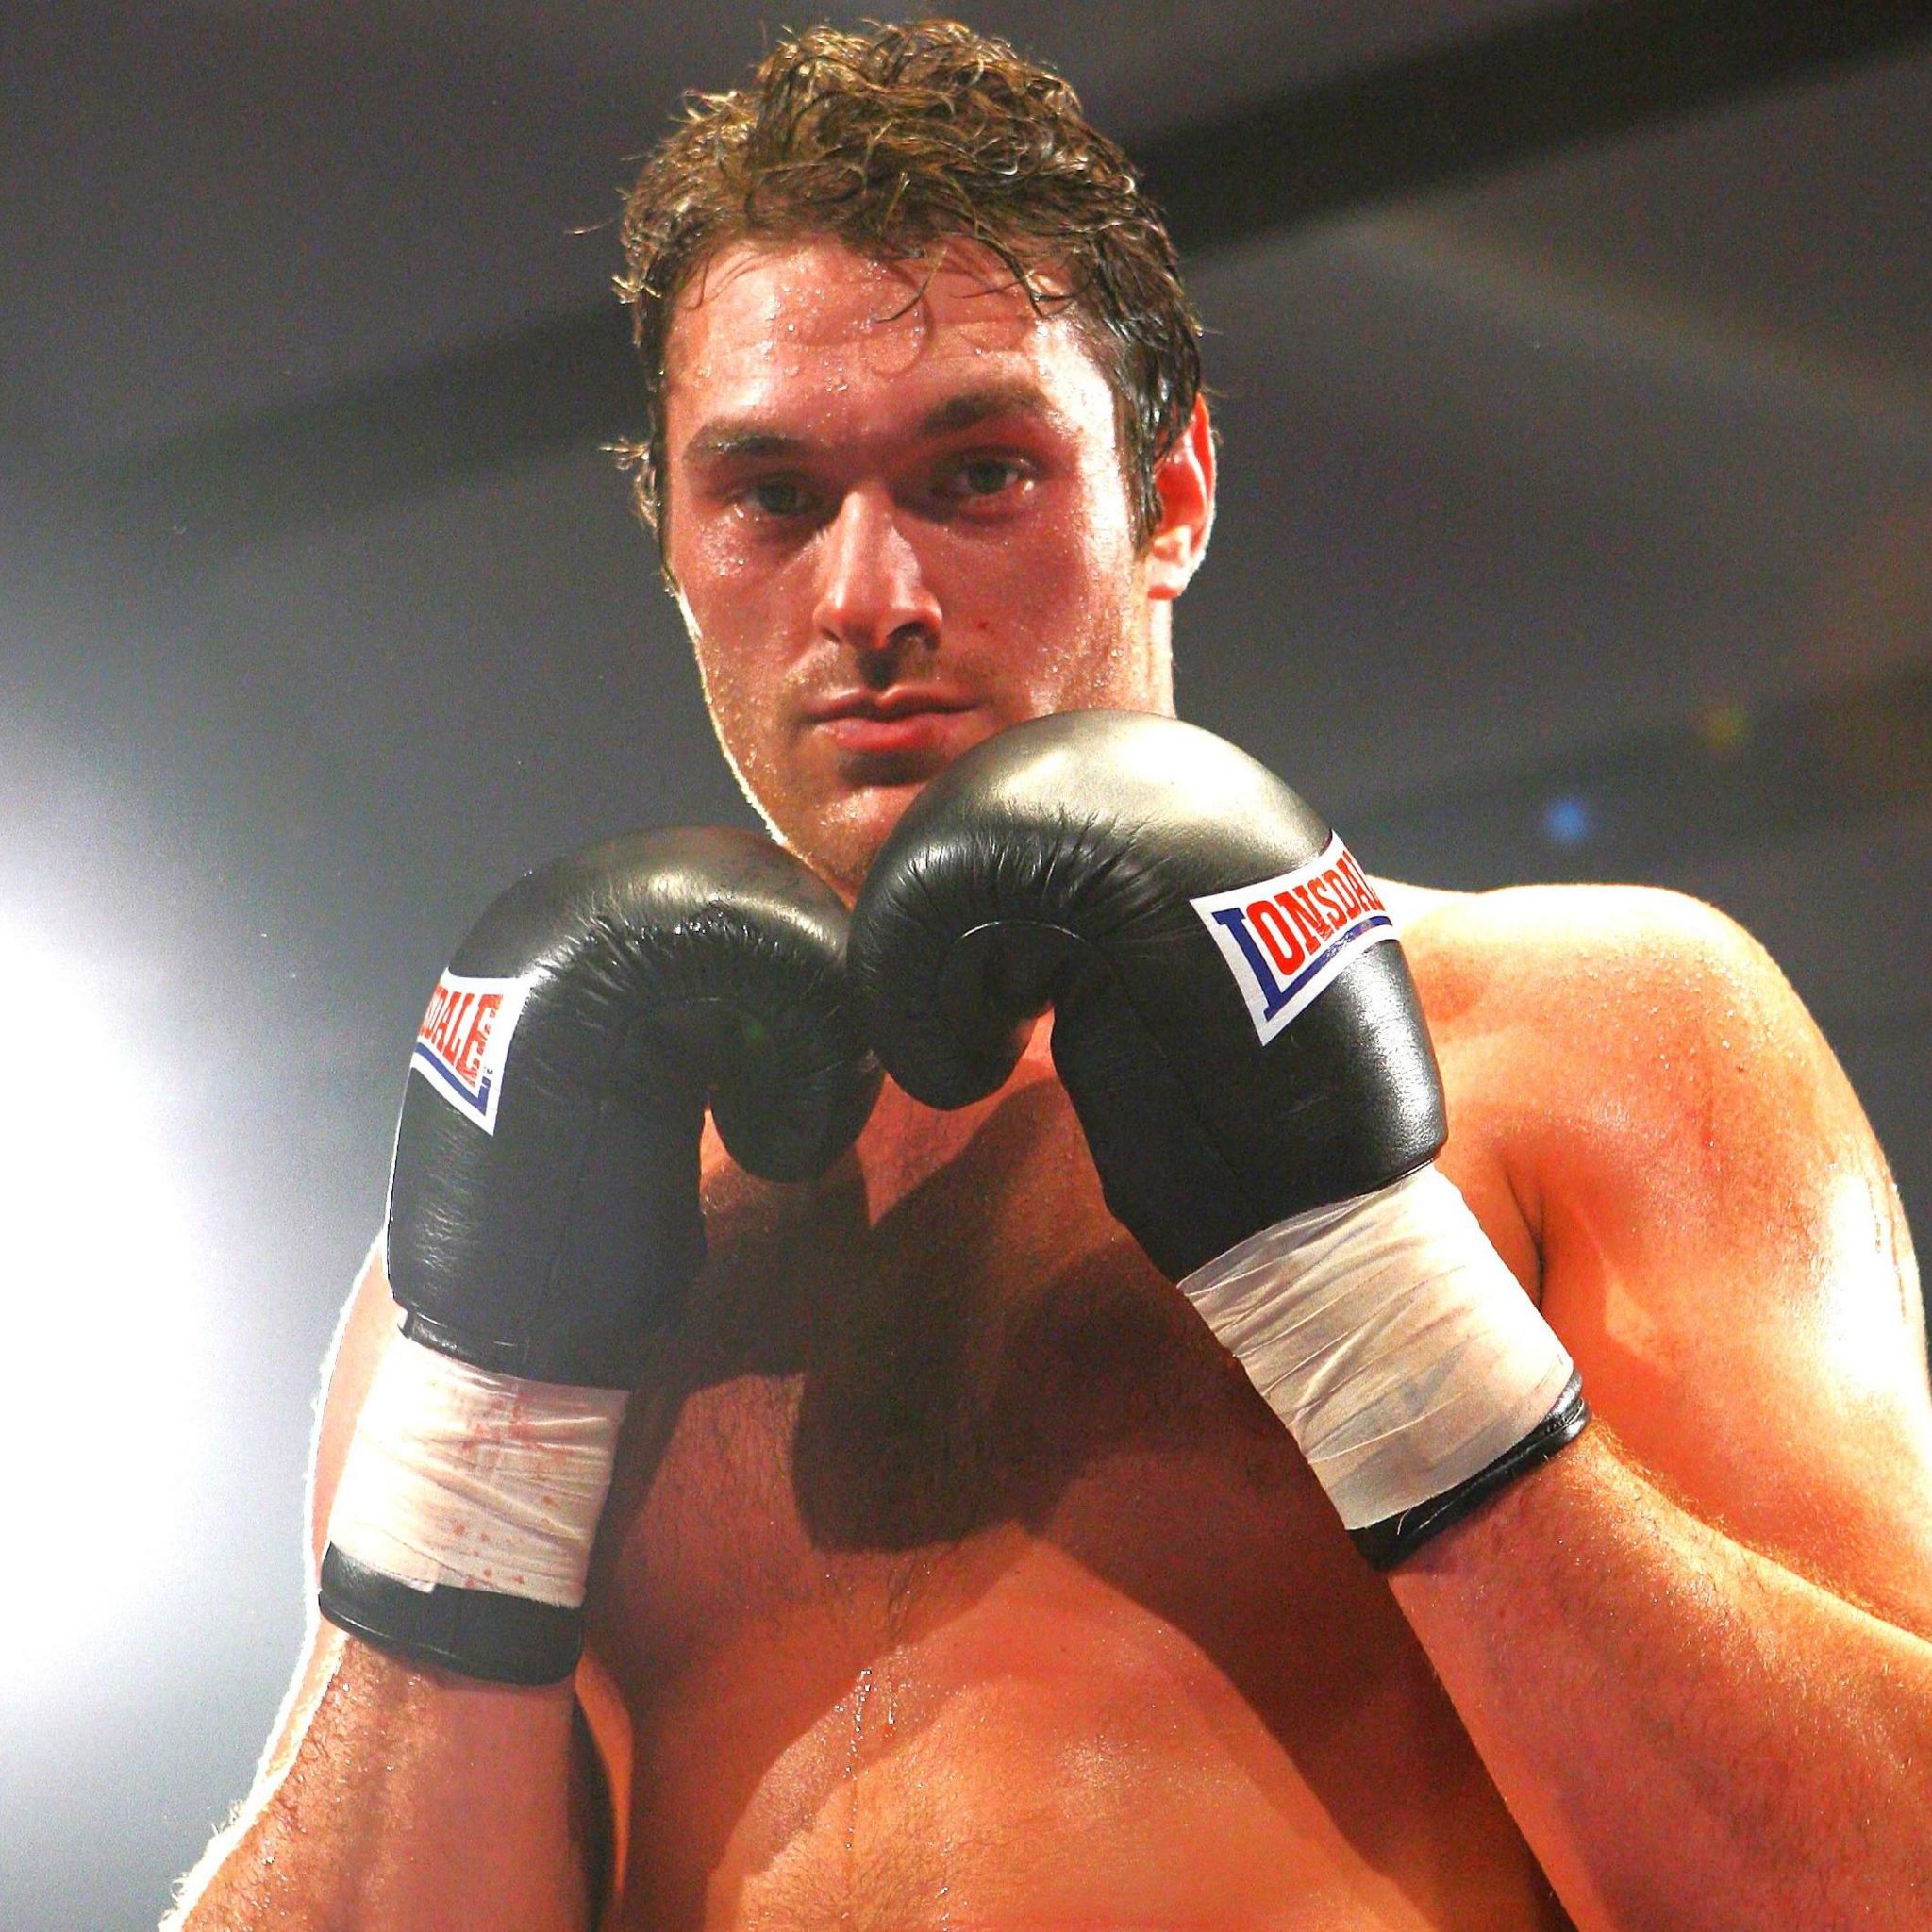 Tyson Fury poses with his gloves high around his chin